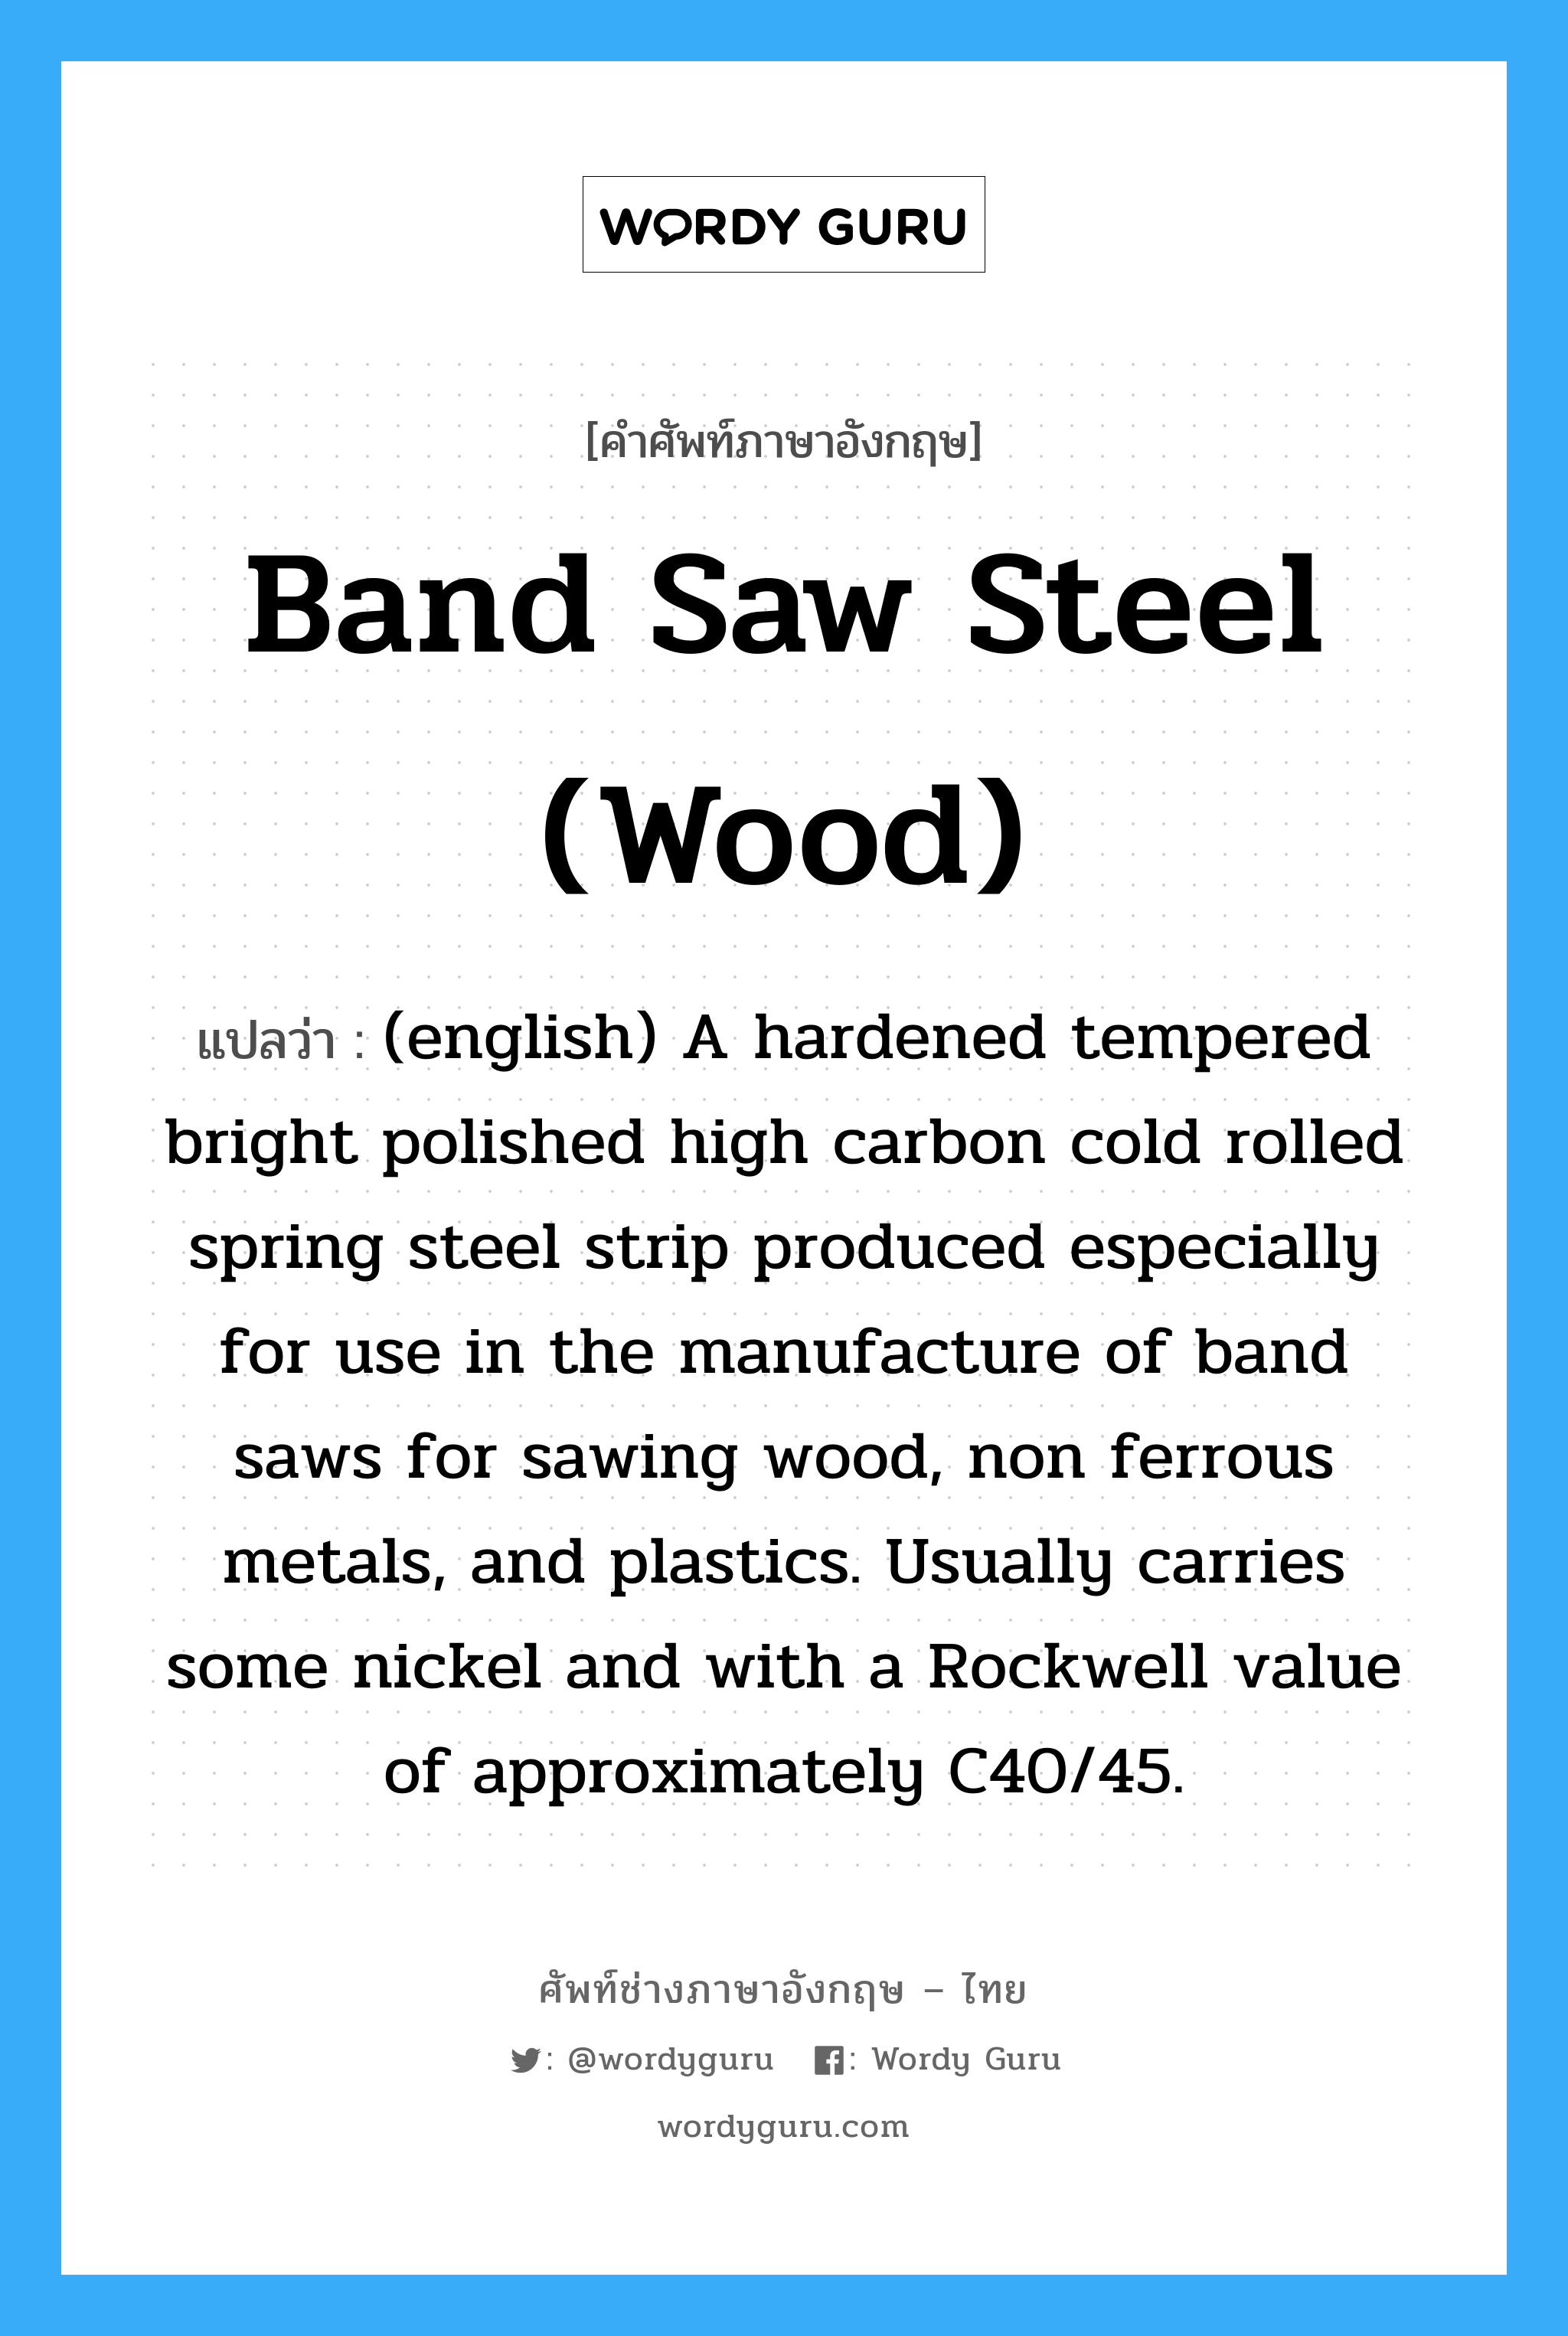 Band Saw Steel (Wood) แปลว่า?, คำศัพท์ช่างภาษาอังกฤษ - ไทย Band Saw Steel (Wood) คำศัพท์ภาษาอังกฤษ Band Saw Steel (Wood) แปลว่า (english) A hardened tempered bright polished high carbon cold rolled spring steel strip produced especially for use in the manufacture of band saws for sawing wood, non ferrous metals, and plastics. Usually carries some nickel and with a Rockwell value of approximately C40/45.